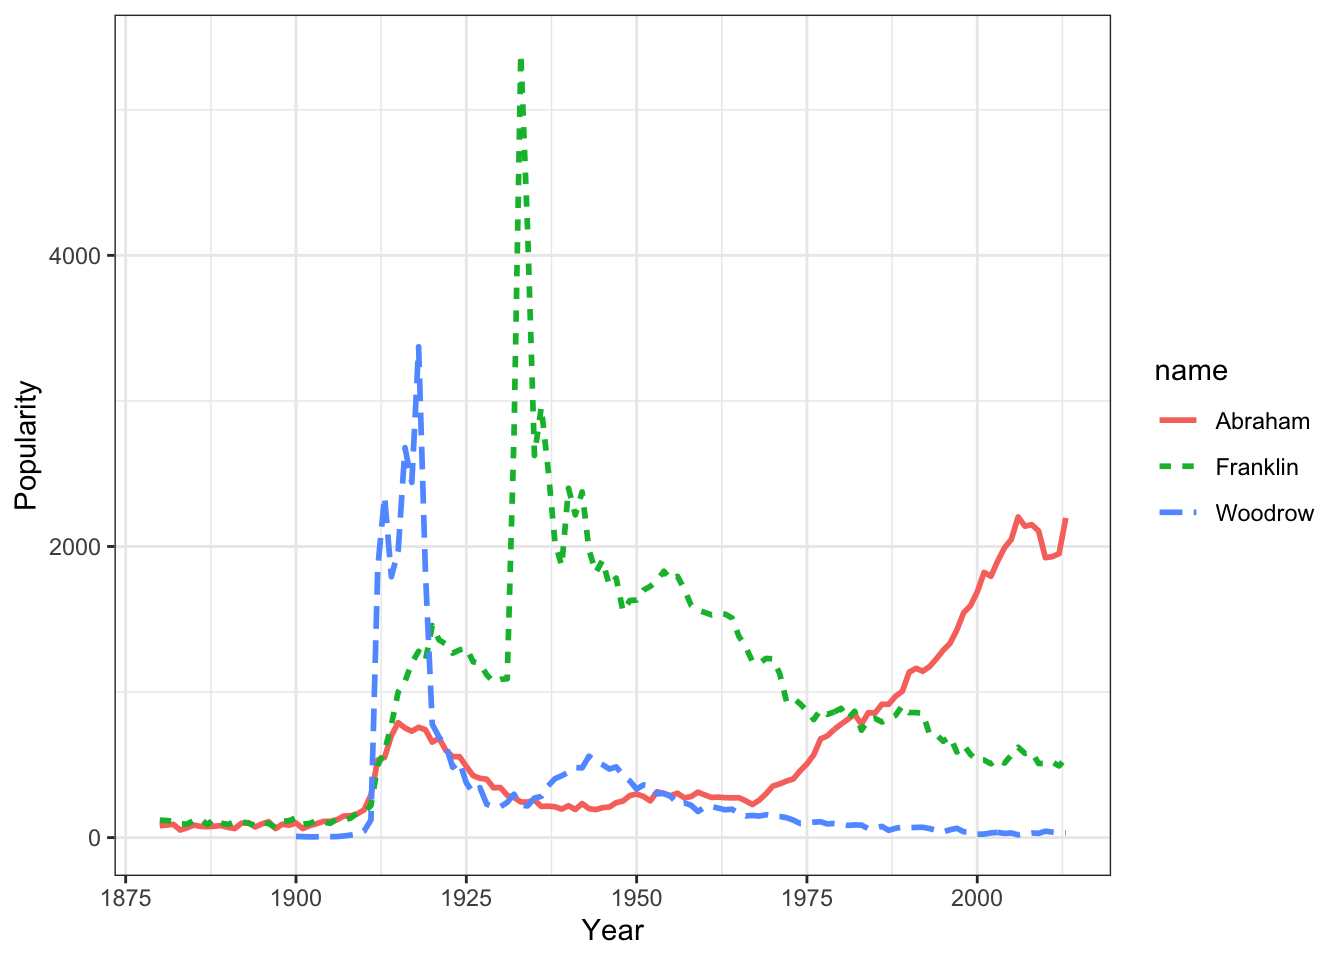 A sketch of the popularity (i.e., frequency) over time of a few names.